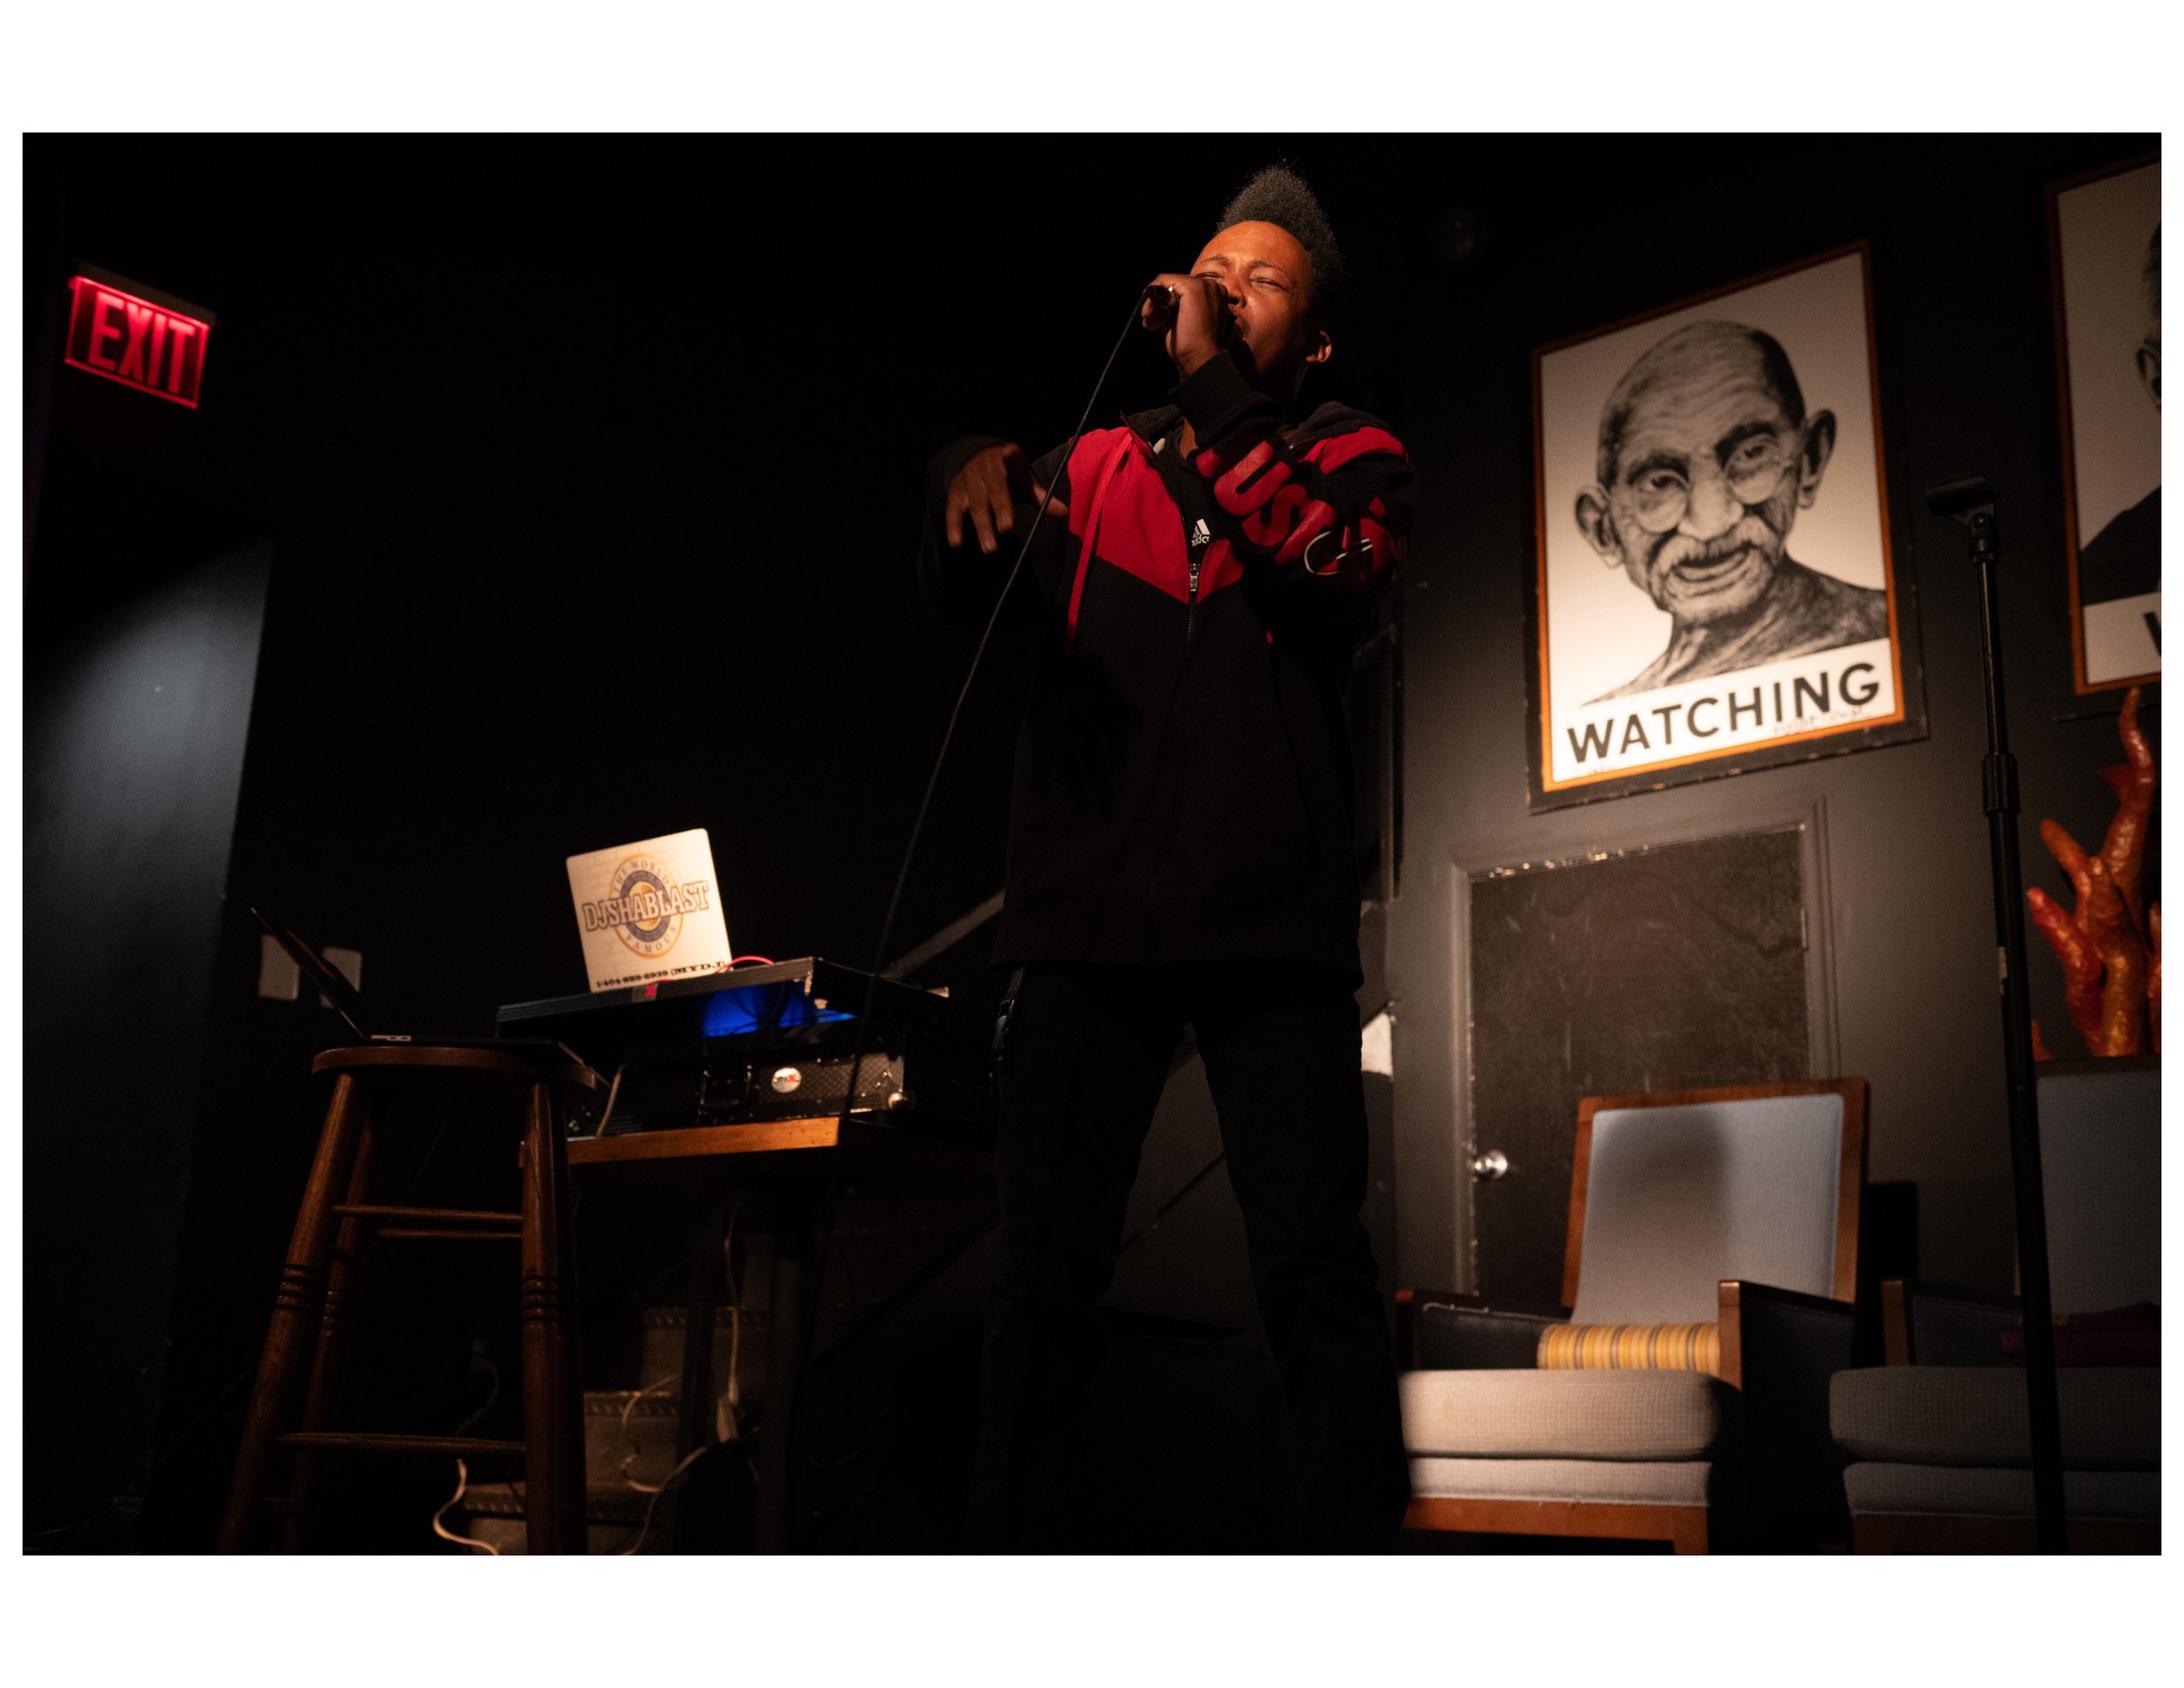   Youth Poet Mica Super performs an original song at an open mic event hosted by Words Beats &amp; Life Inc. at Busboys and Poets in Washington, DC. Photographer/Victoria Ford  